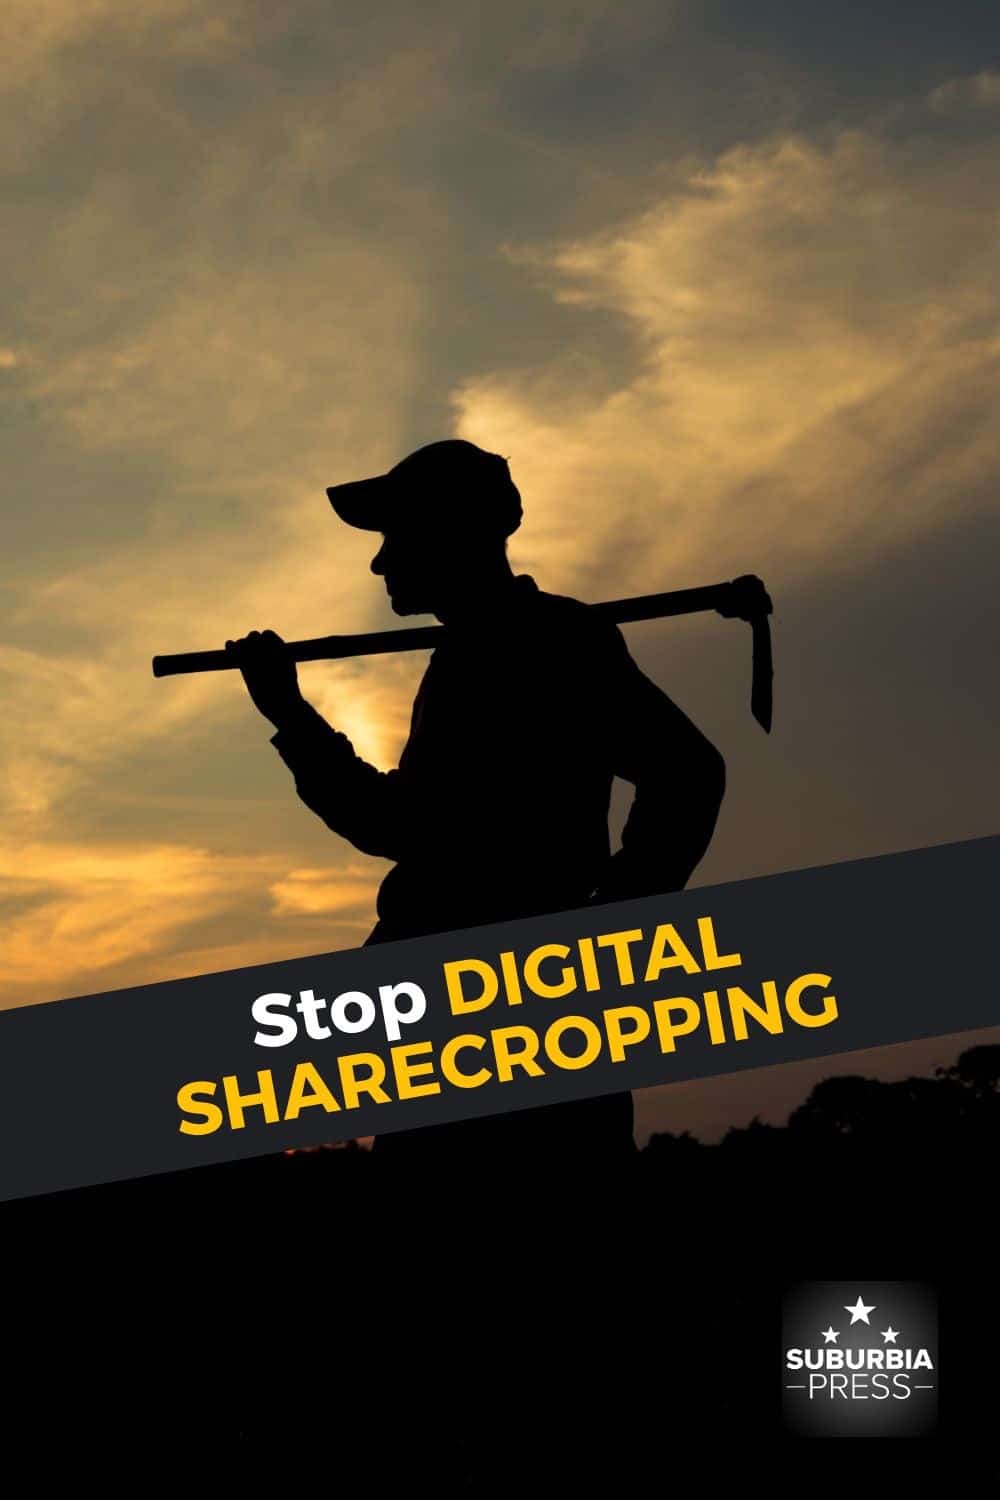 Who Are You Promoting with Digital Sharecropping?